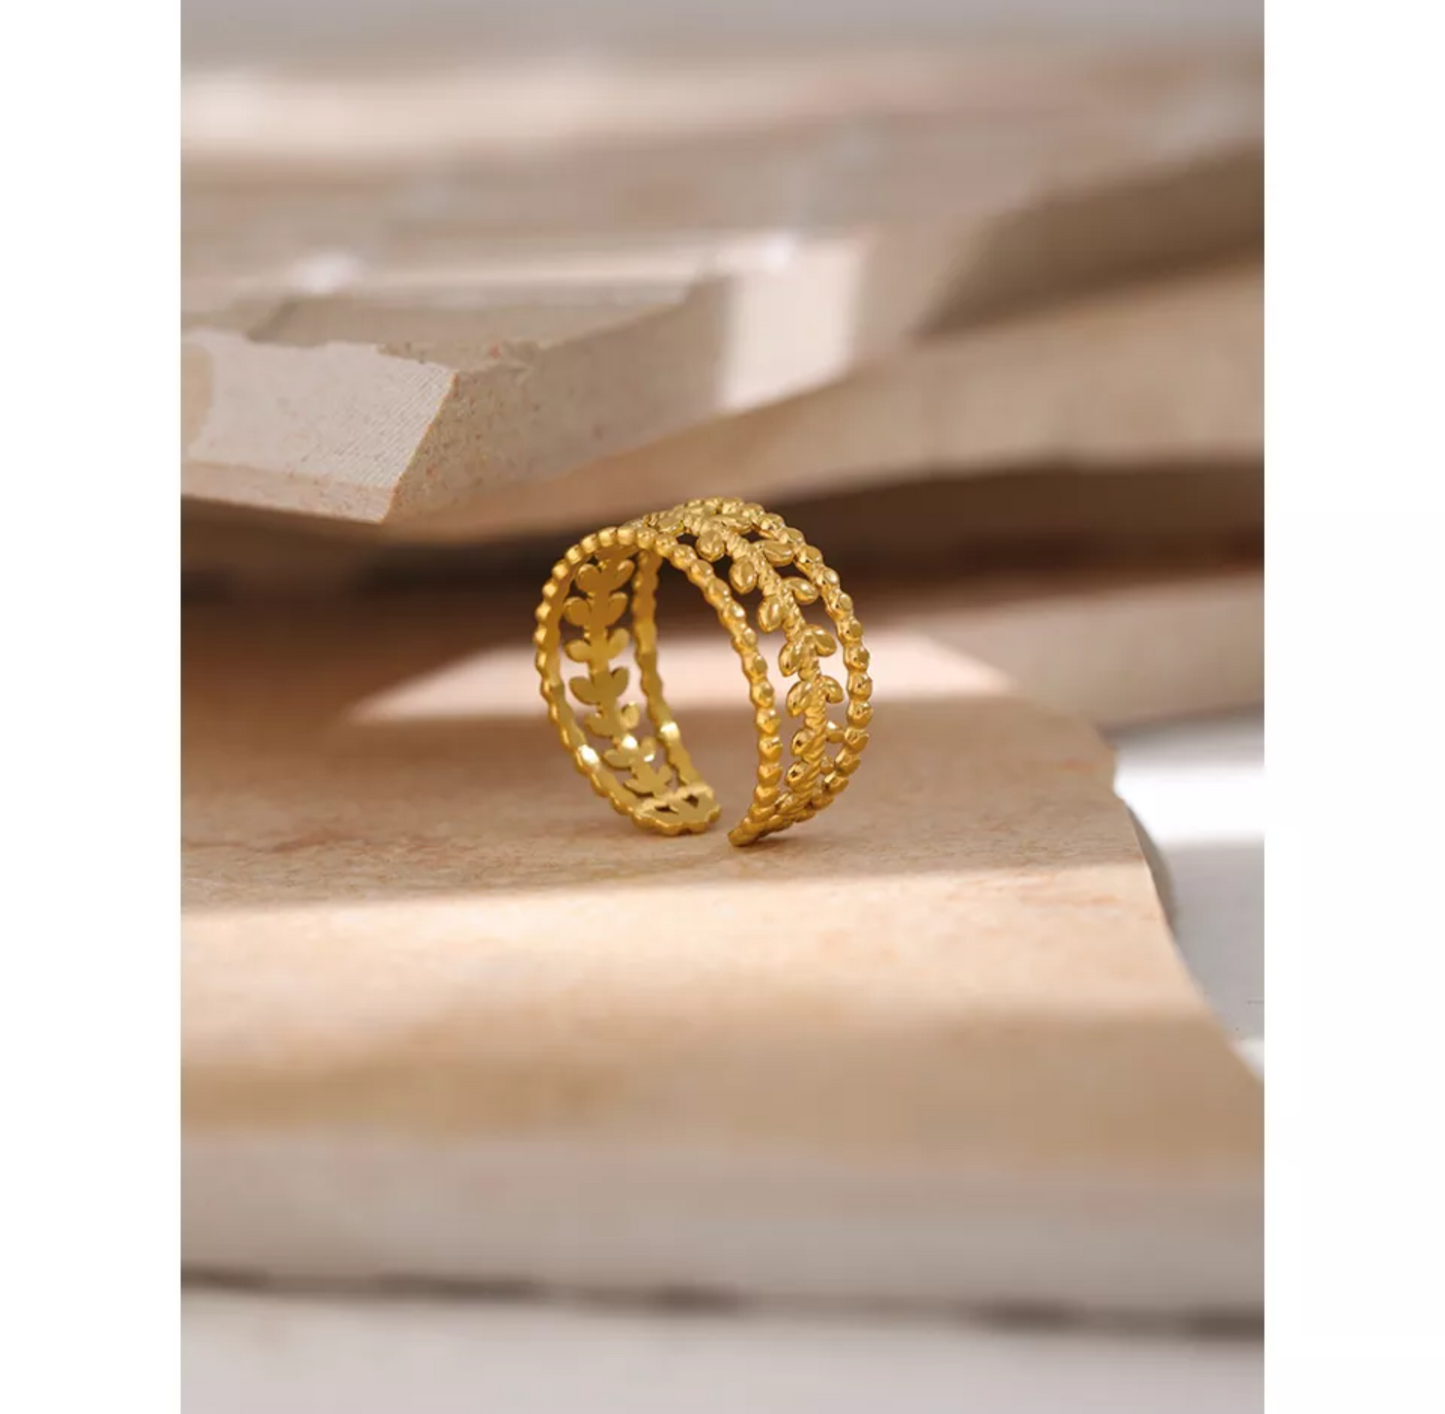 MIMI - Adjustable Autumn Leaves Ring - Golden Collection